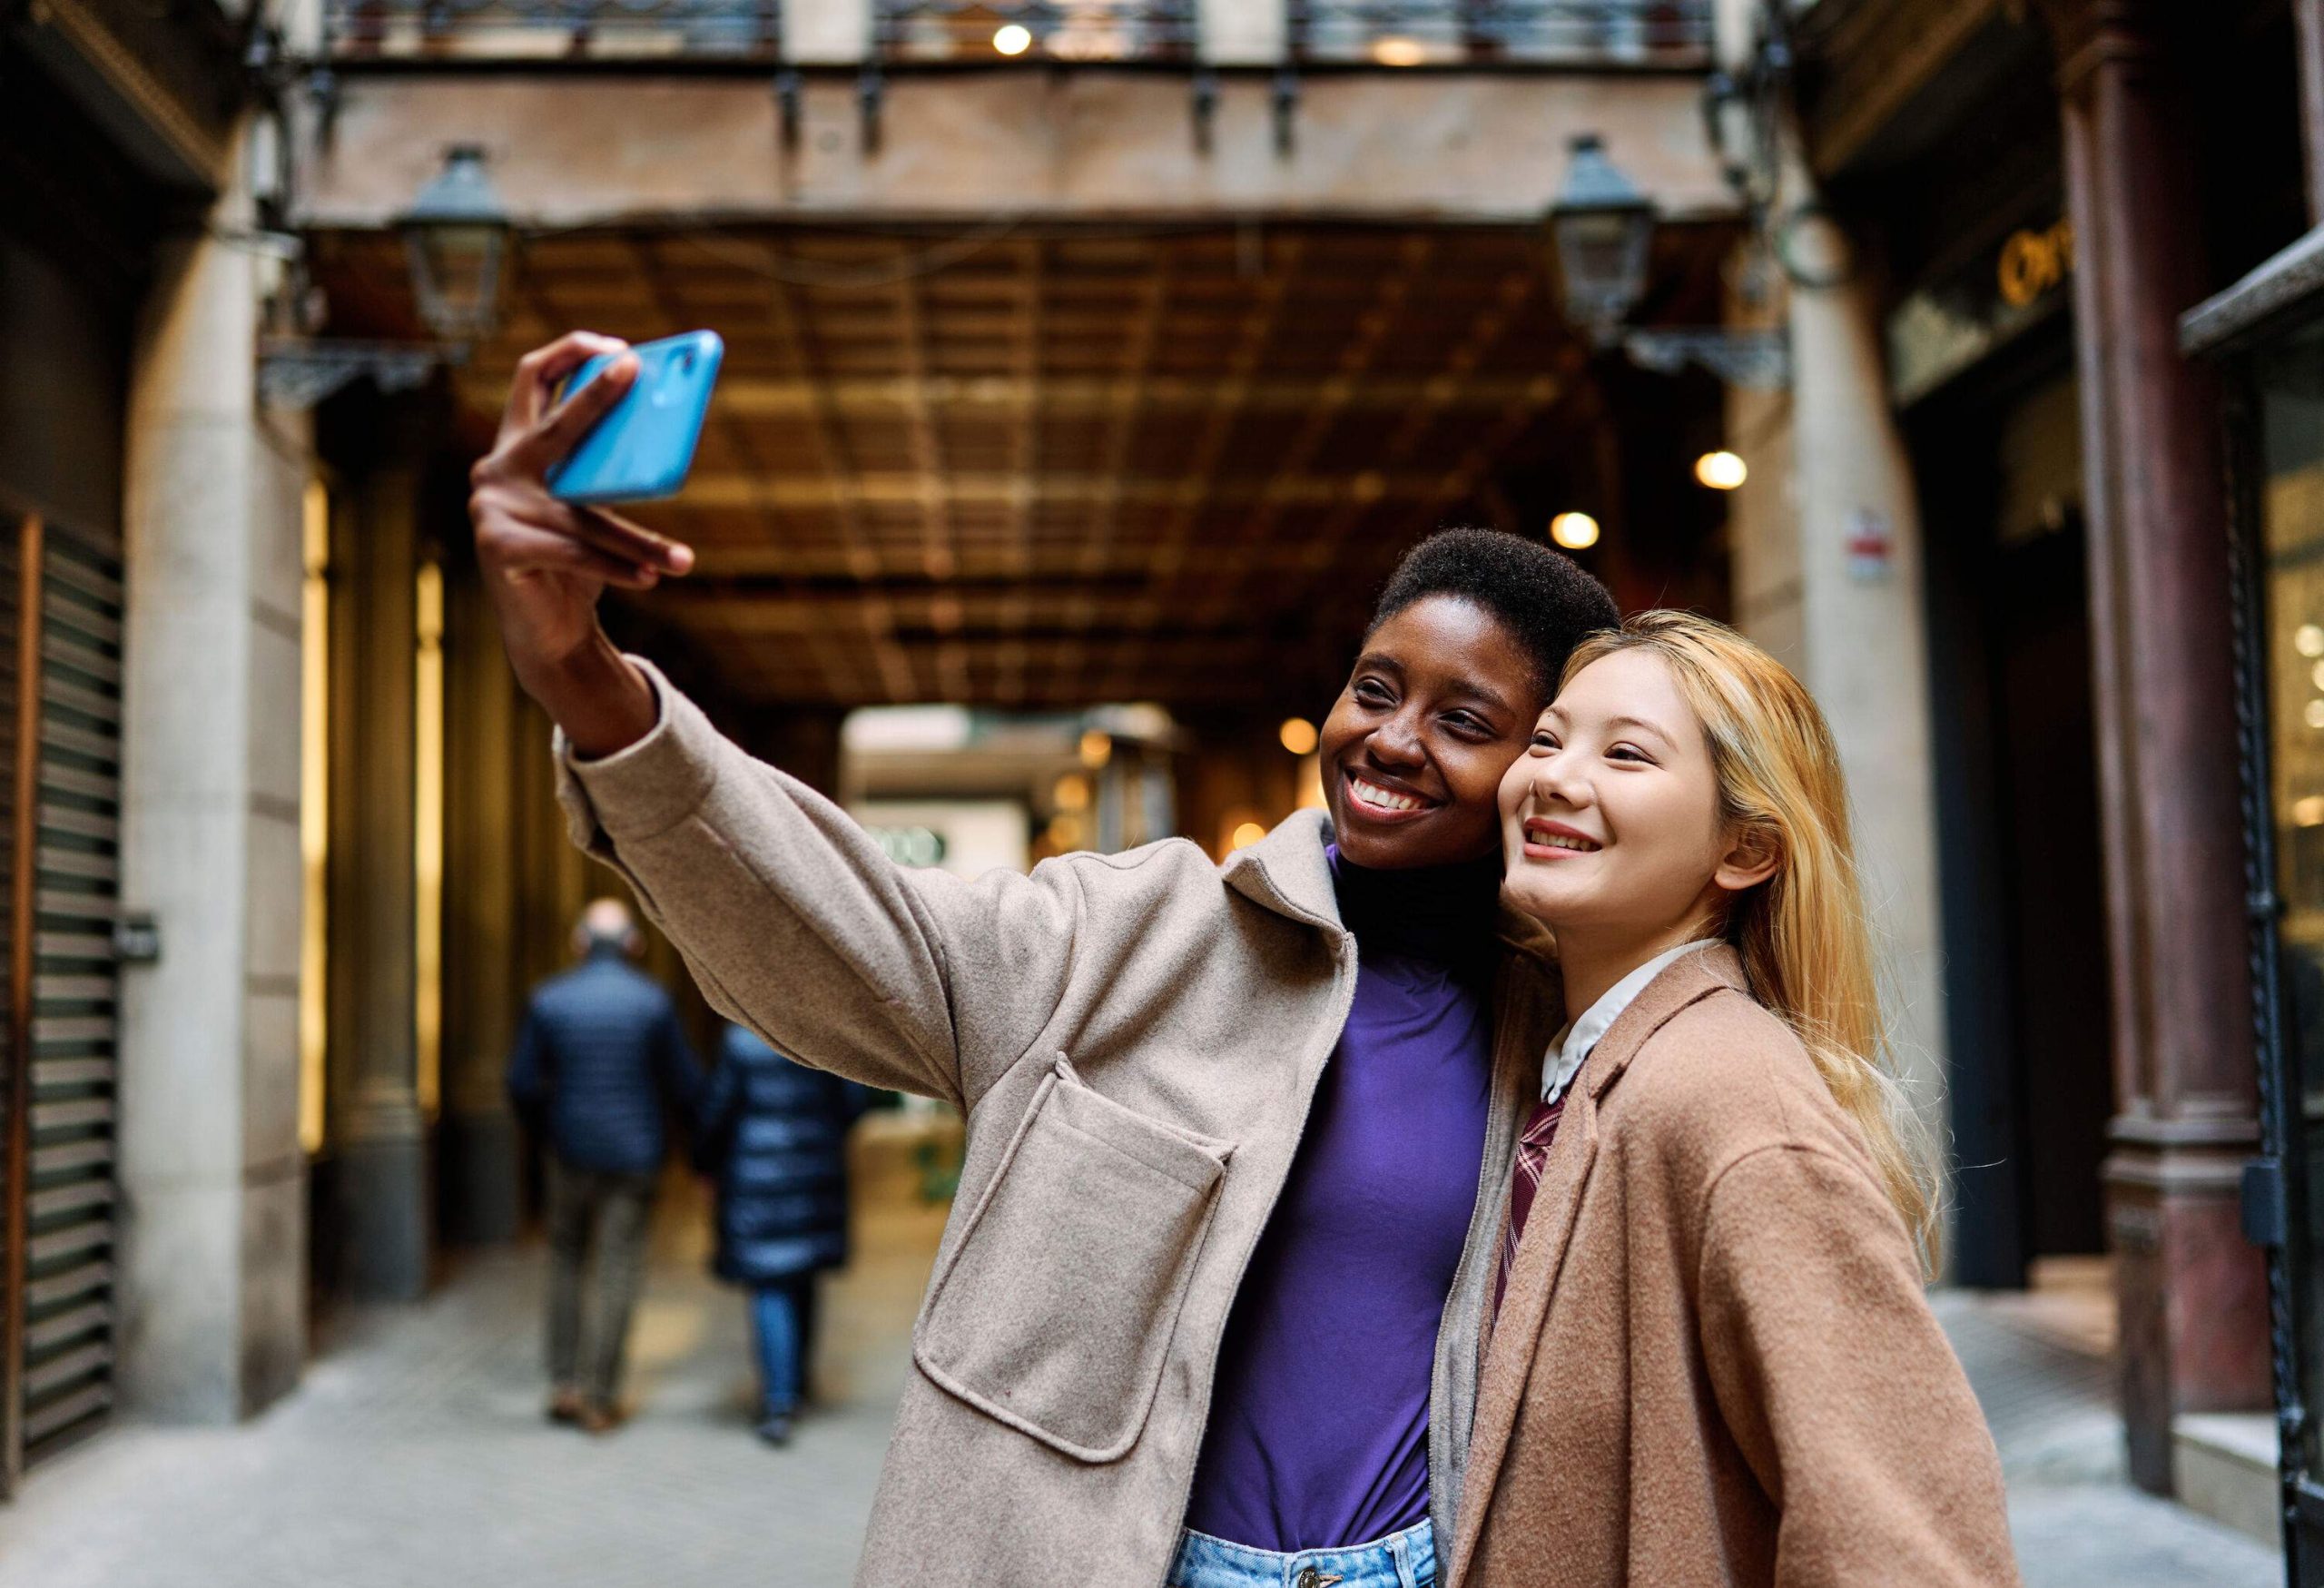 Two women standing on the street, posing for a selfie.